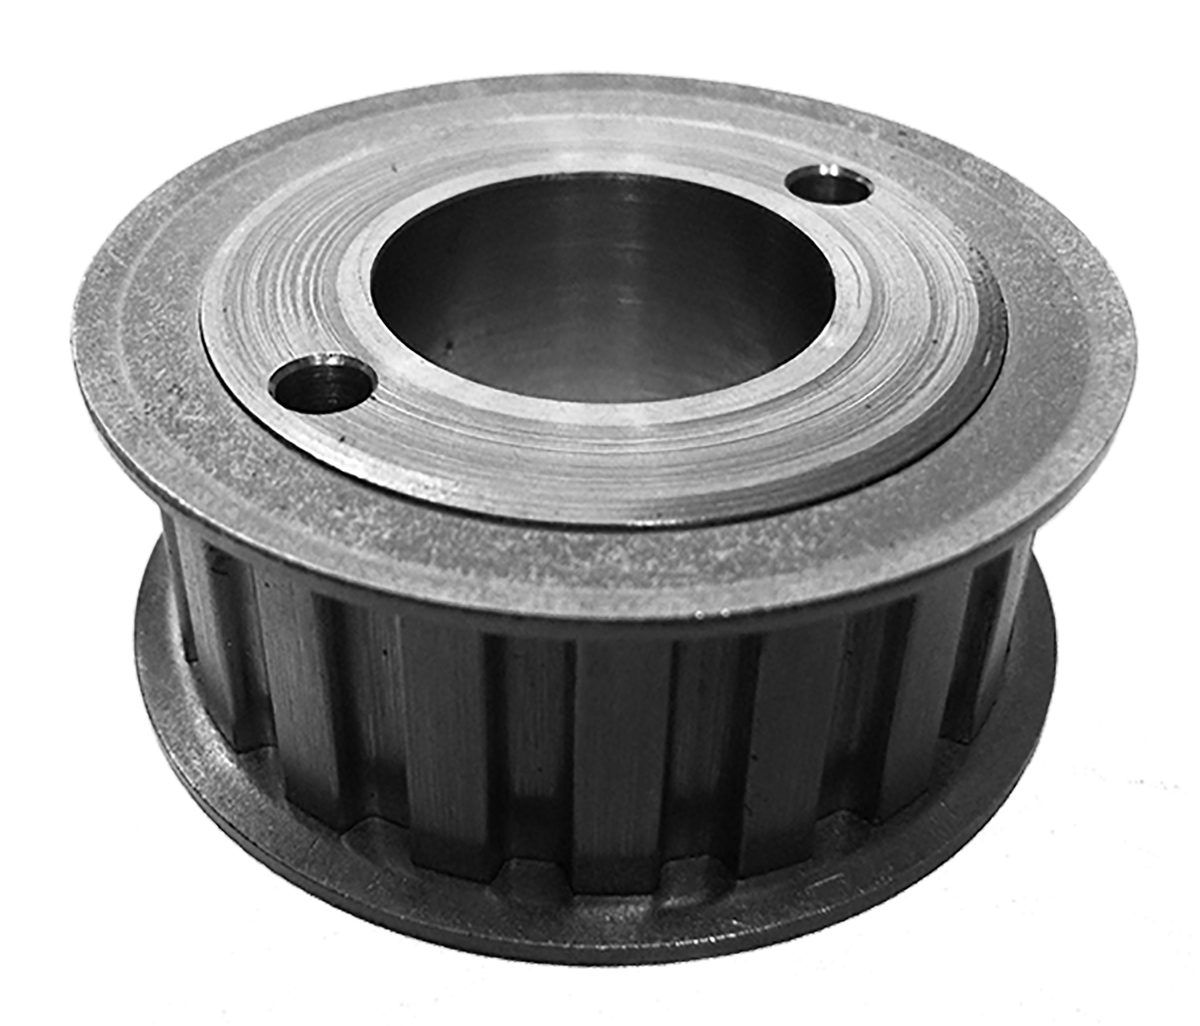 40LP075 - Cast Iron Imperial Pitch Pulleys